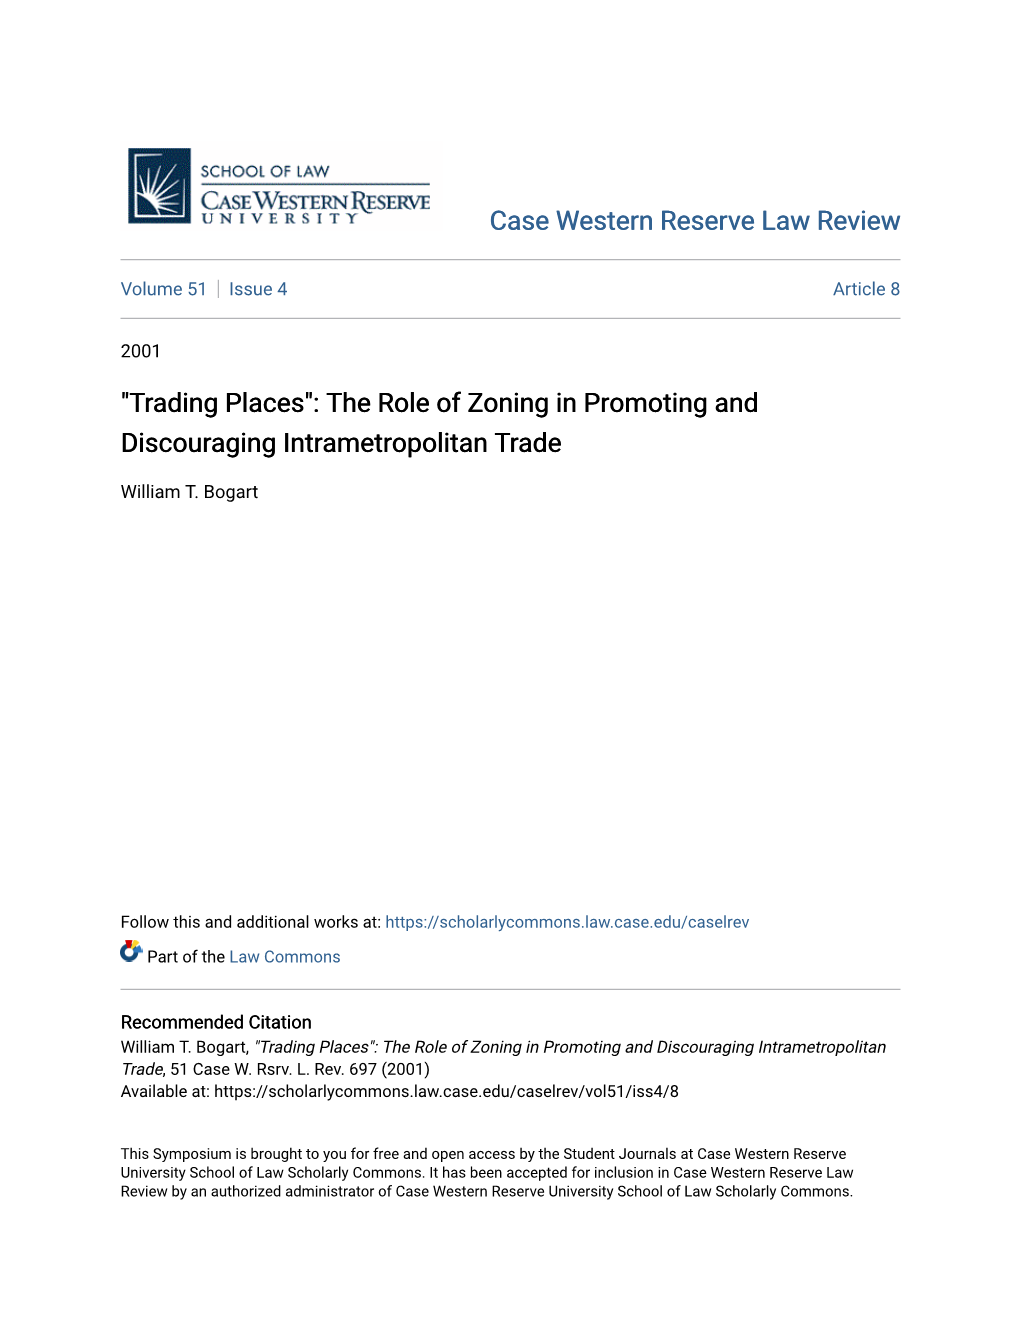 The Role of Zoning in Promoting and Discouraging Intrametropolitan Trade